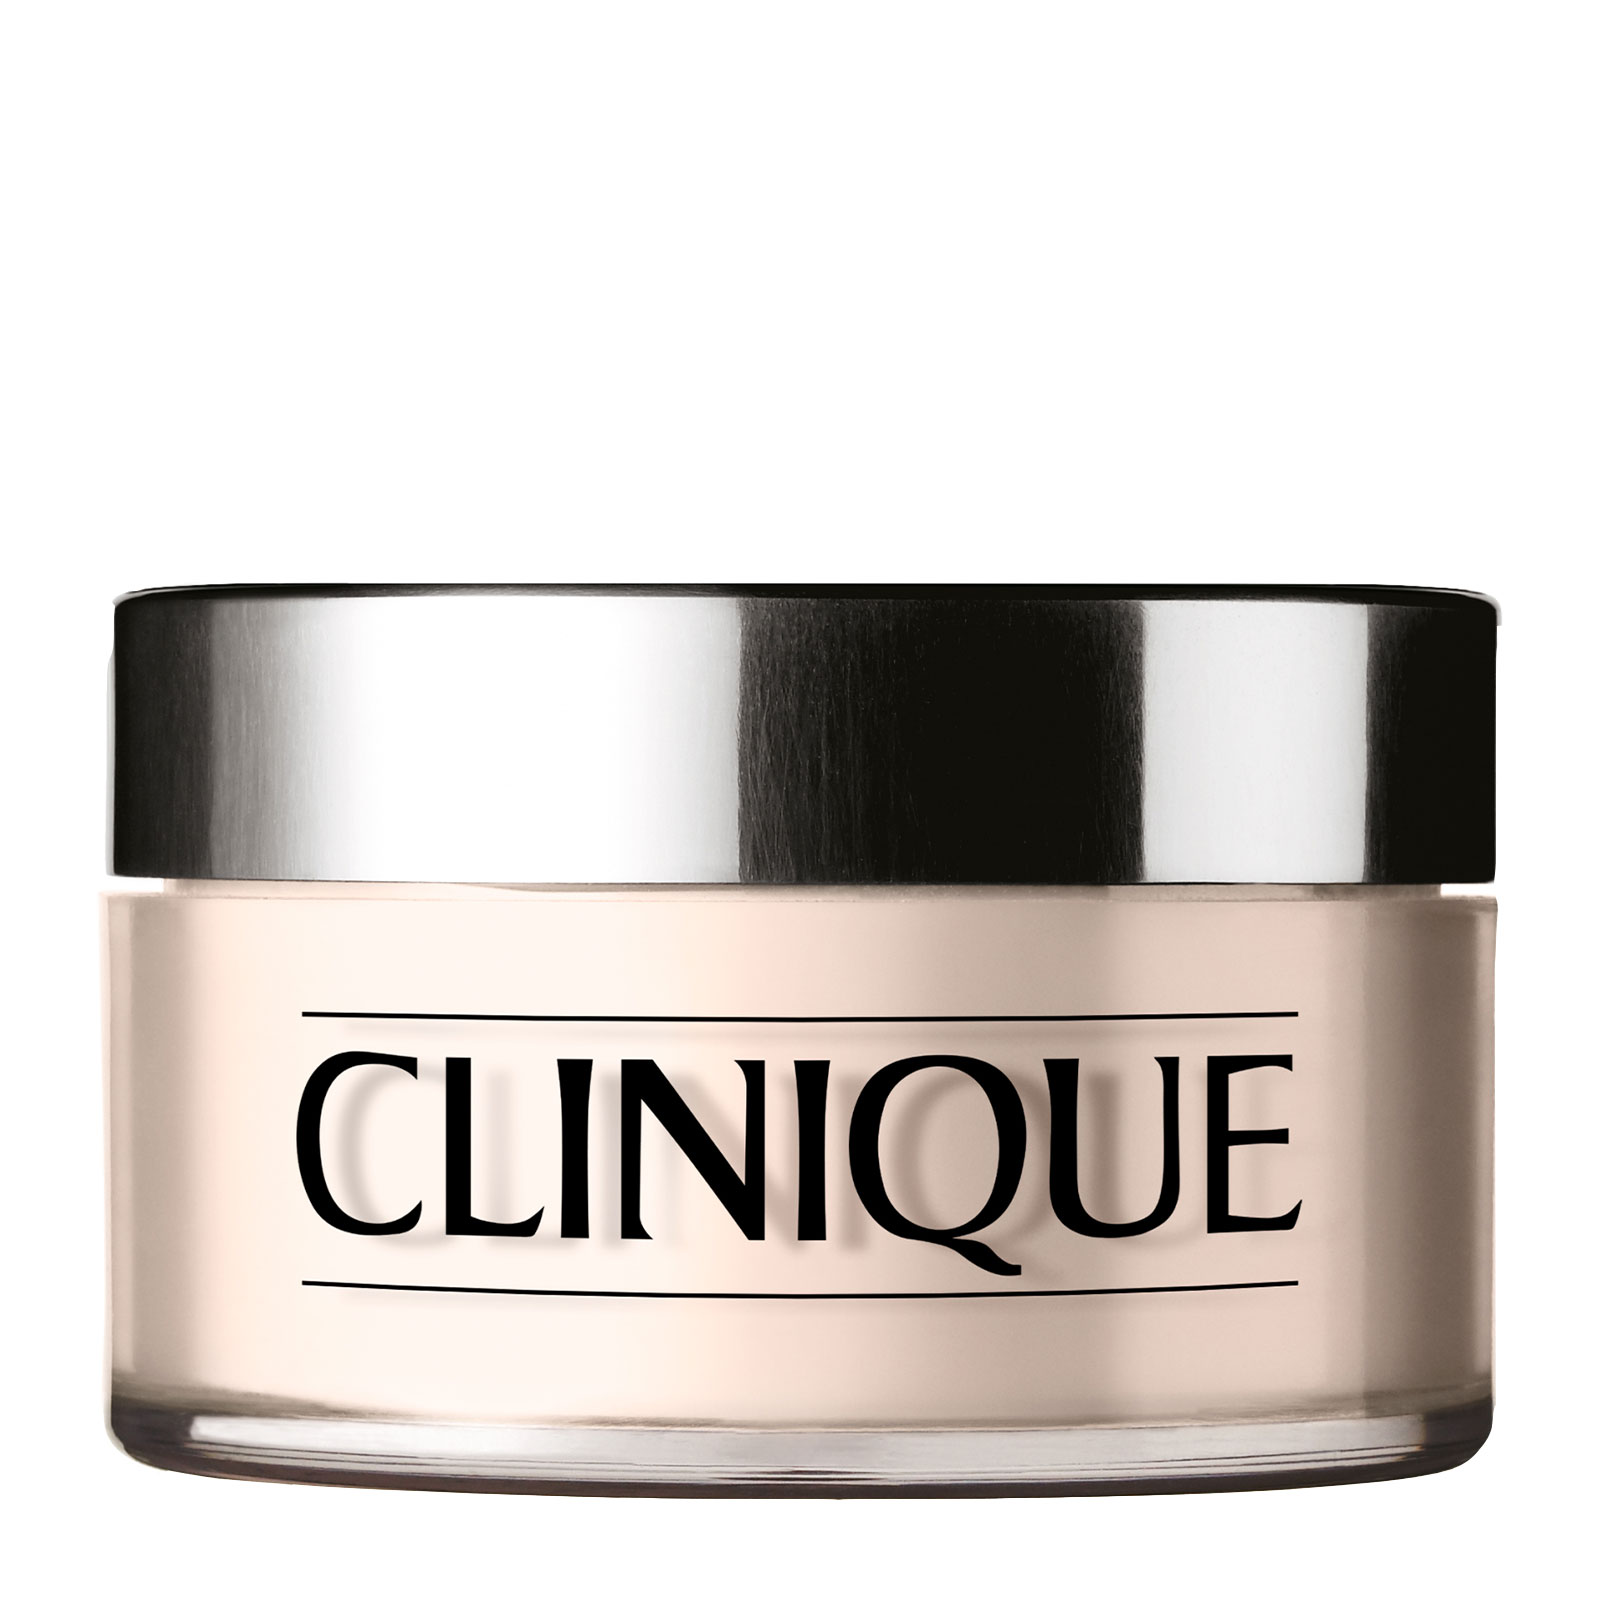 Clinique Blended Face Powder 25G Transparency 2